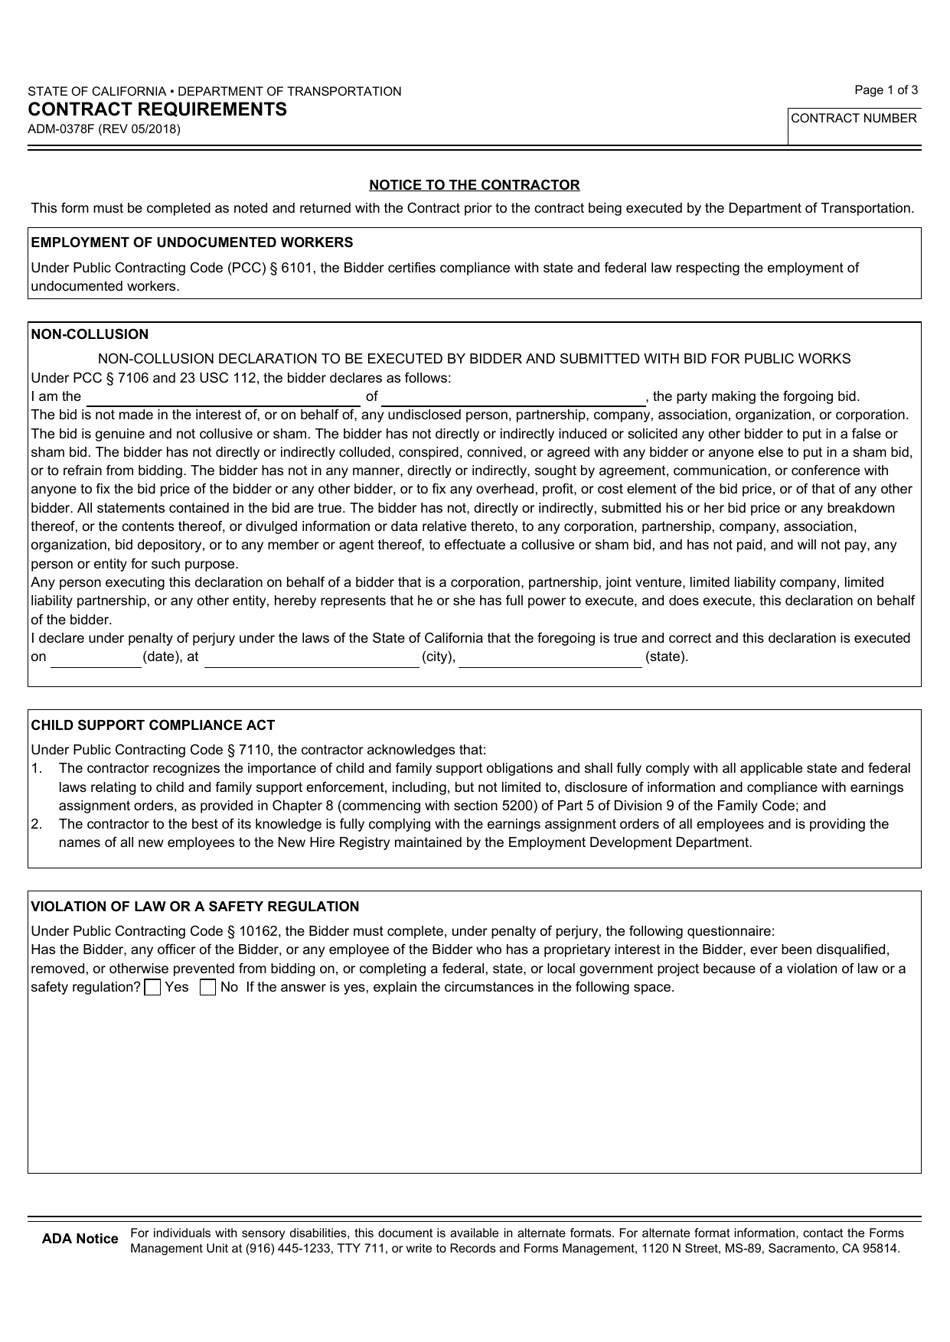 Form ADM-0378F Contract Requirements - California, Page 1